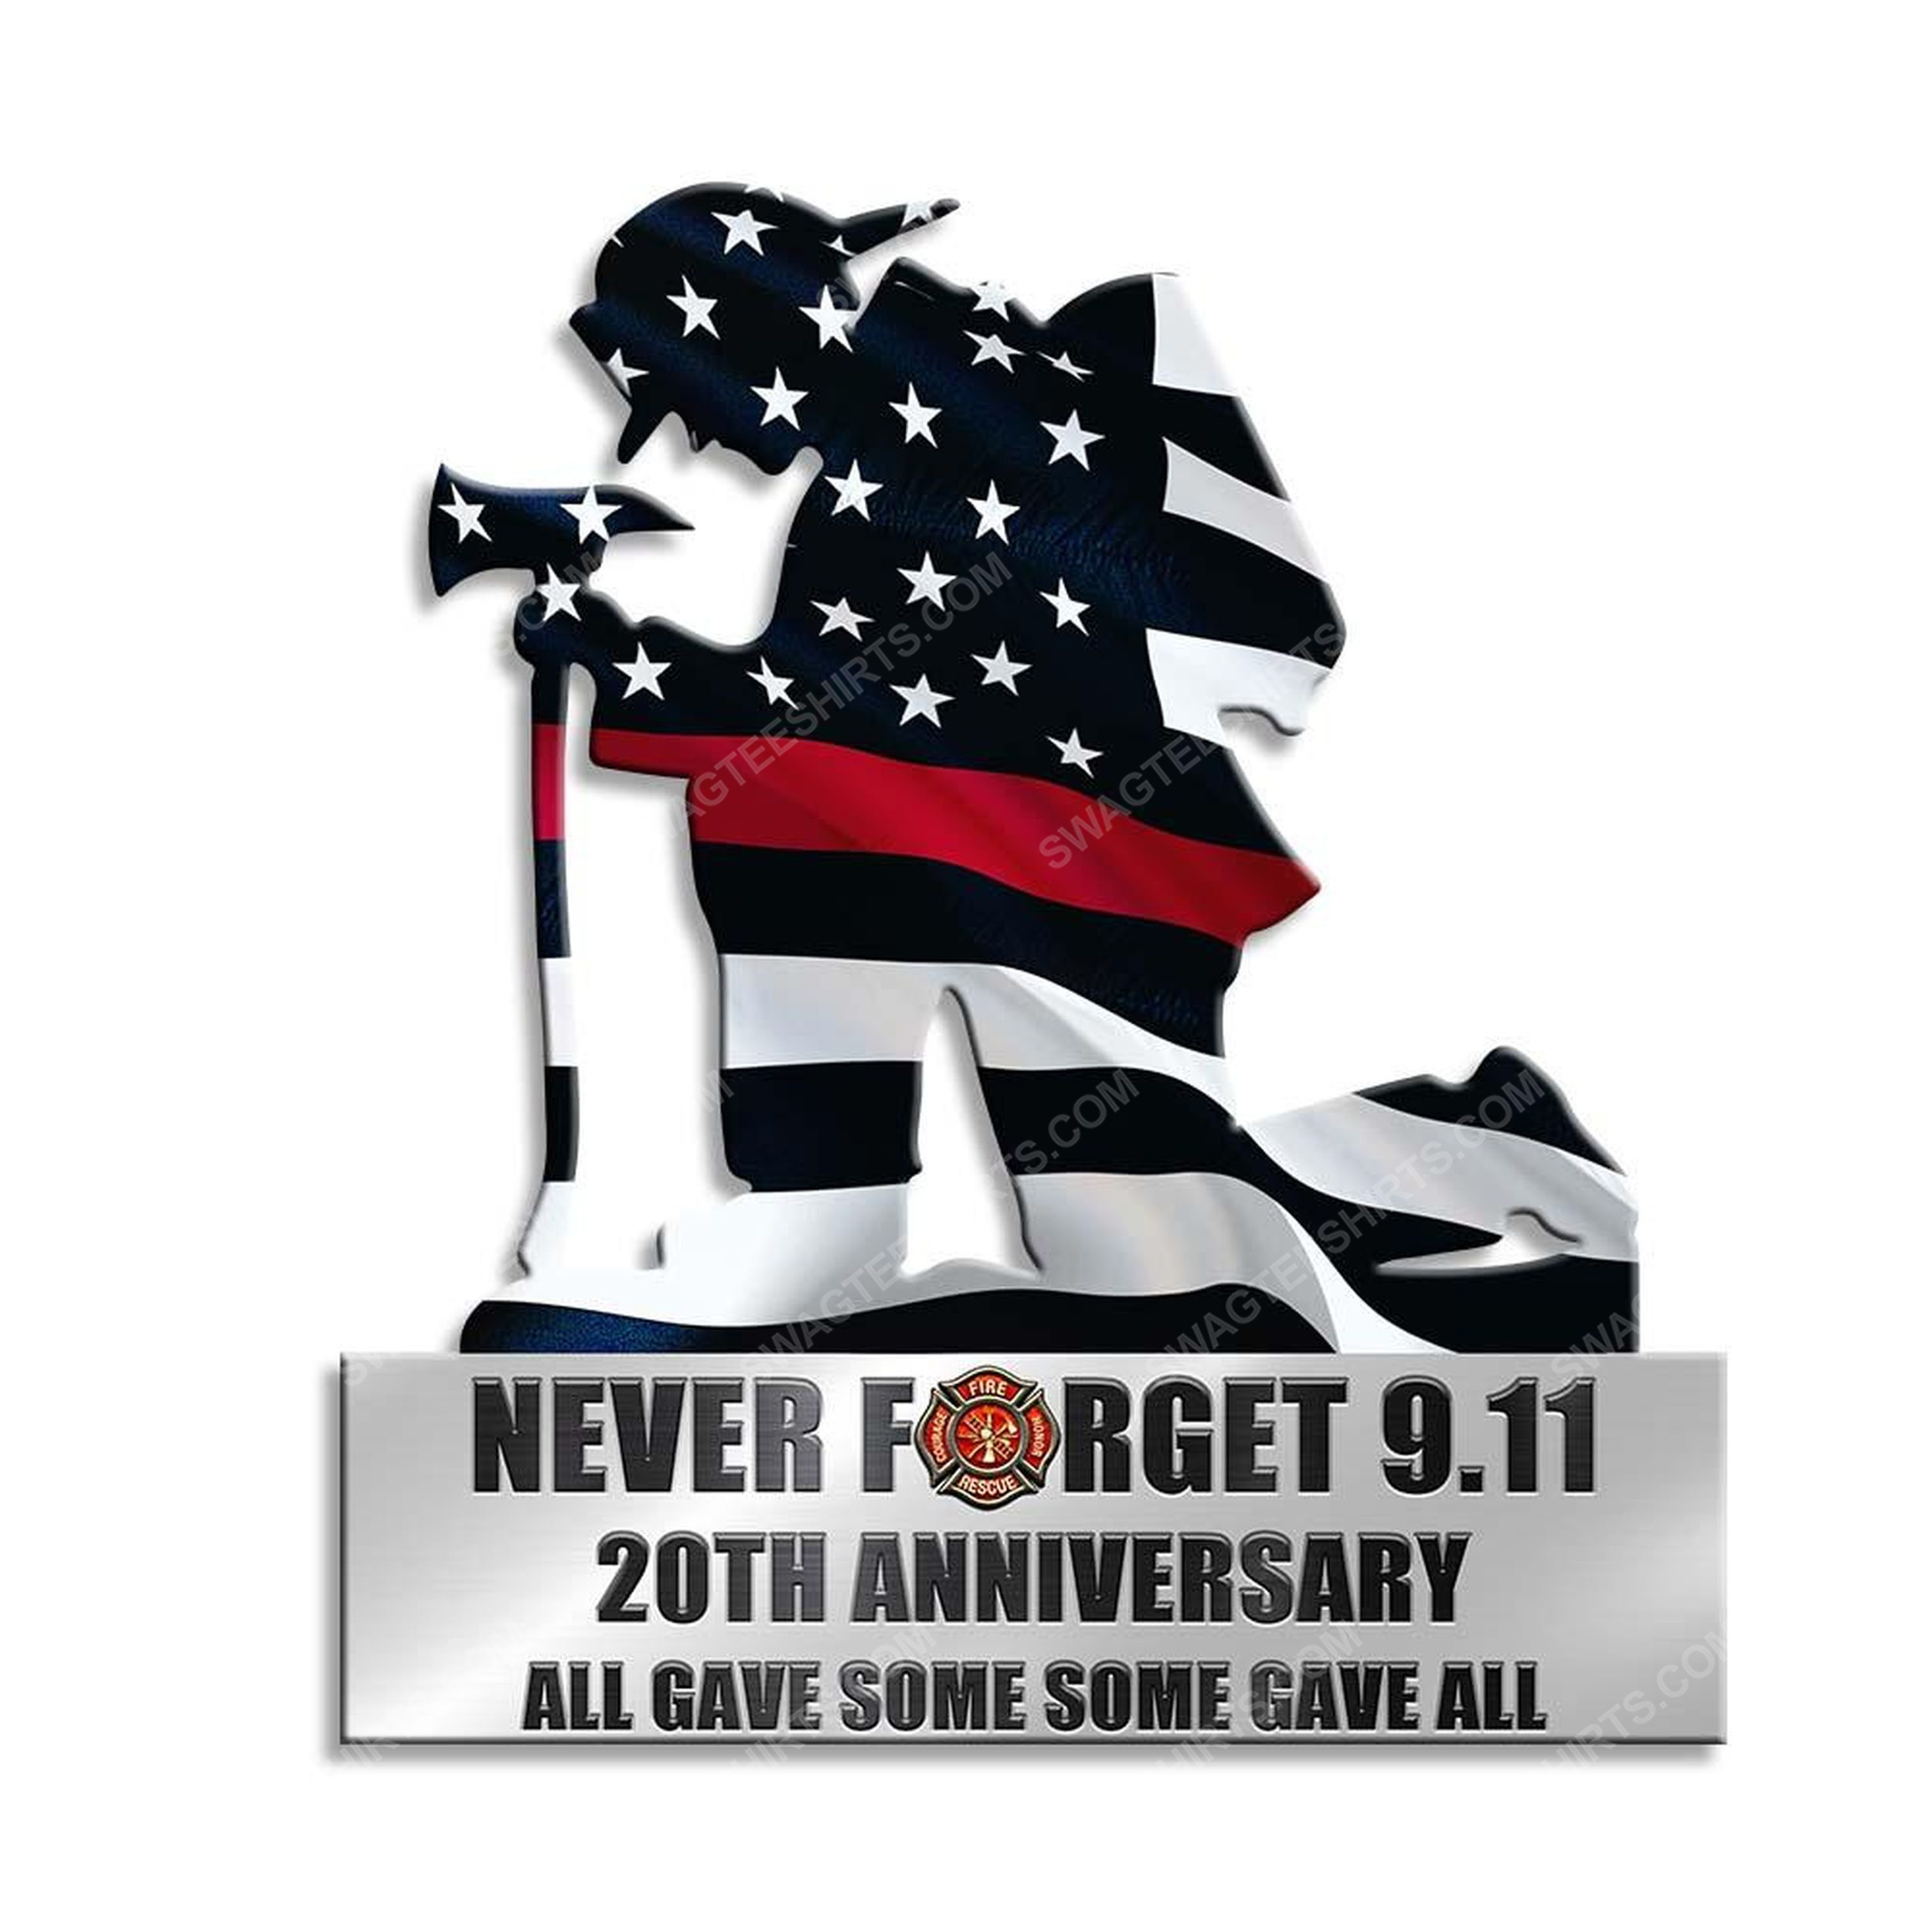 Kneeling firefighter never forget 9 11 20th anniversary yard sign 2(1)